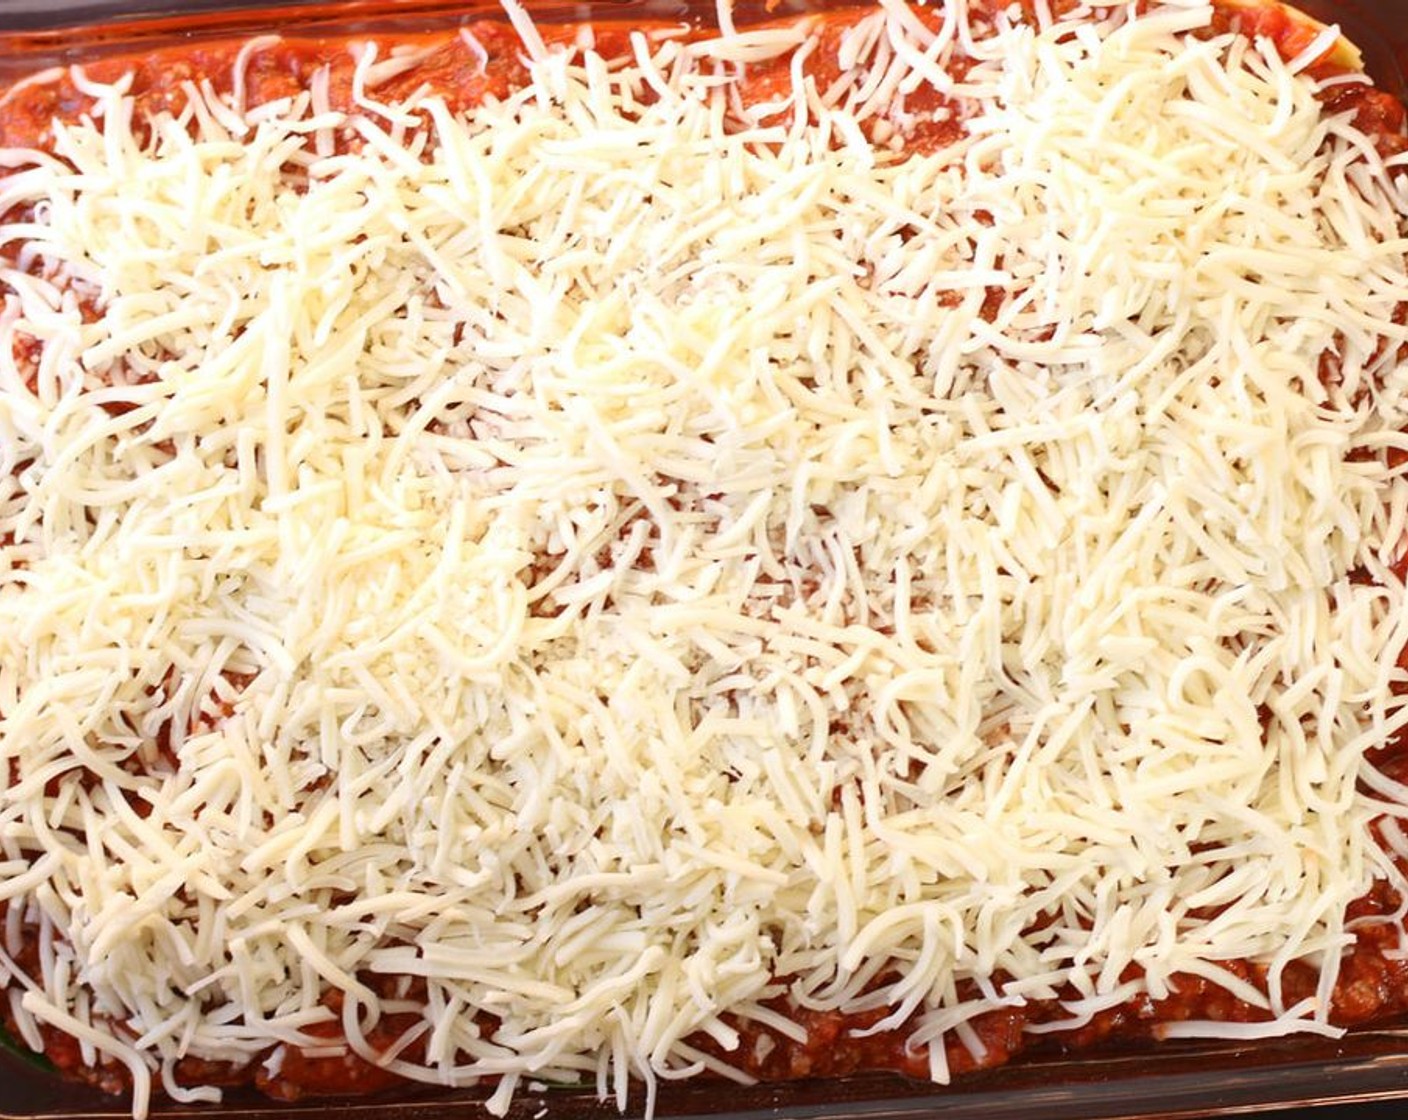 step 5 Sprinkle remaining Shredded Mozzarella Cheese (1 cup) evenly over top, and sprinkle with Grated Parmesan Cheese (1/3 cup).